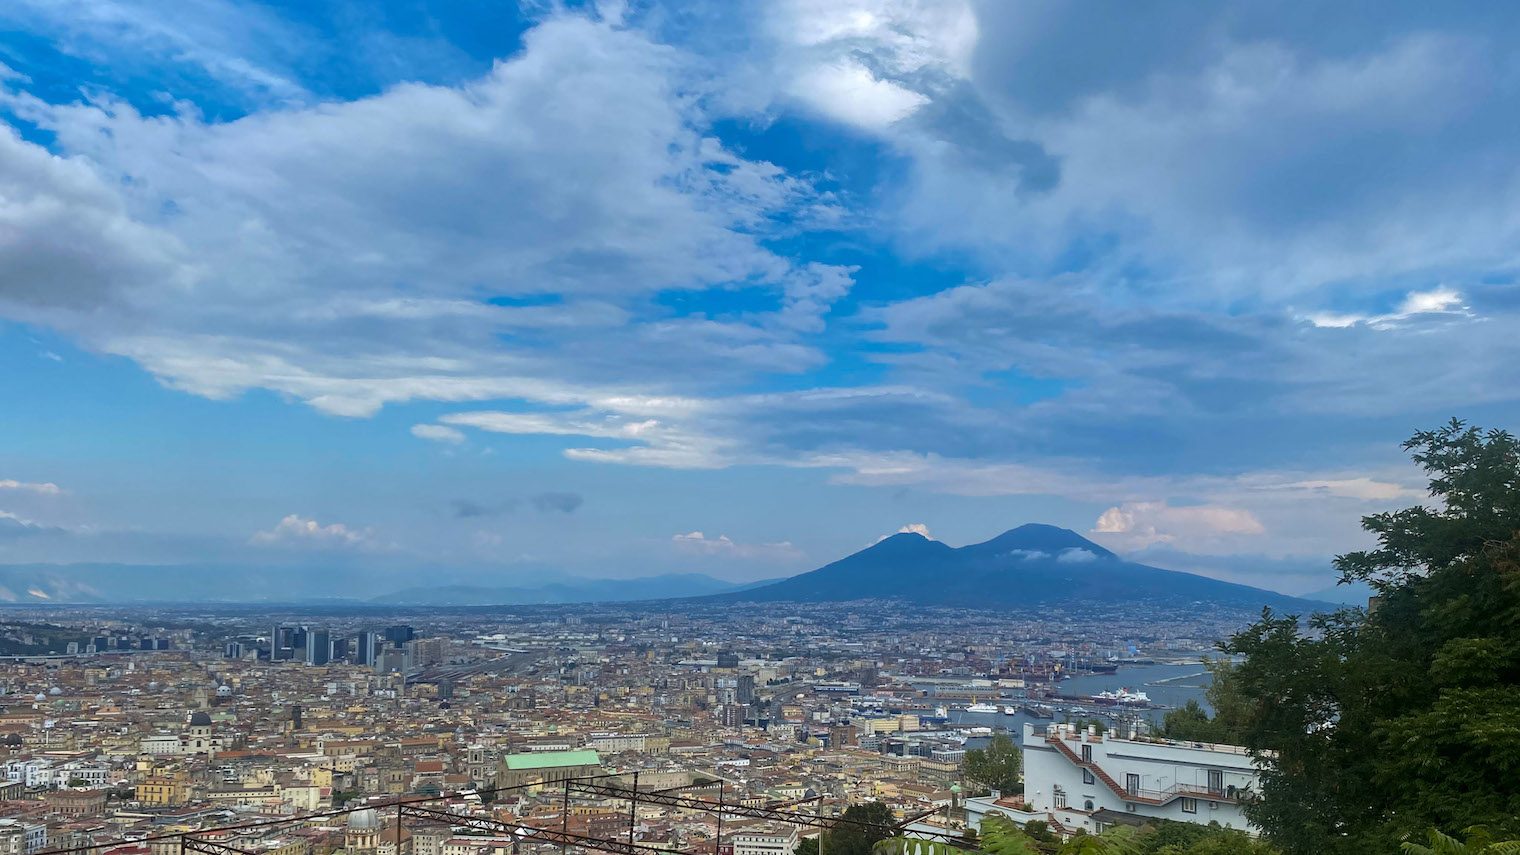 View of mount vesuvius from Castel Sant'Elmo - one day in Naples itinerary